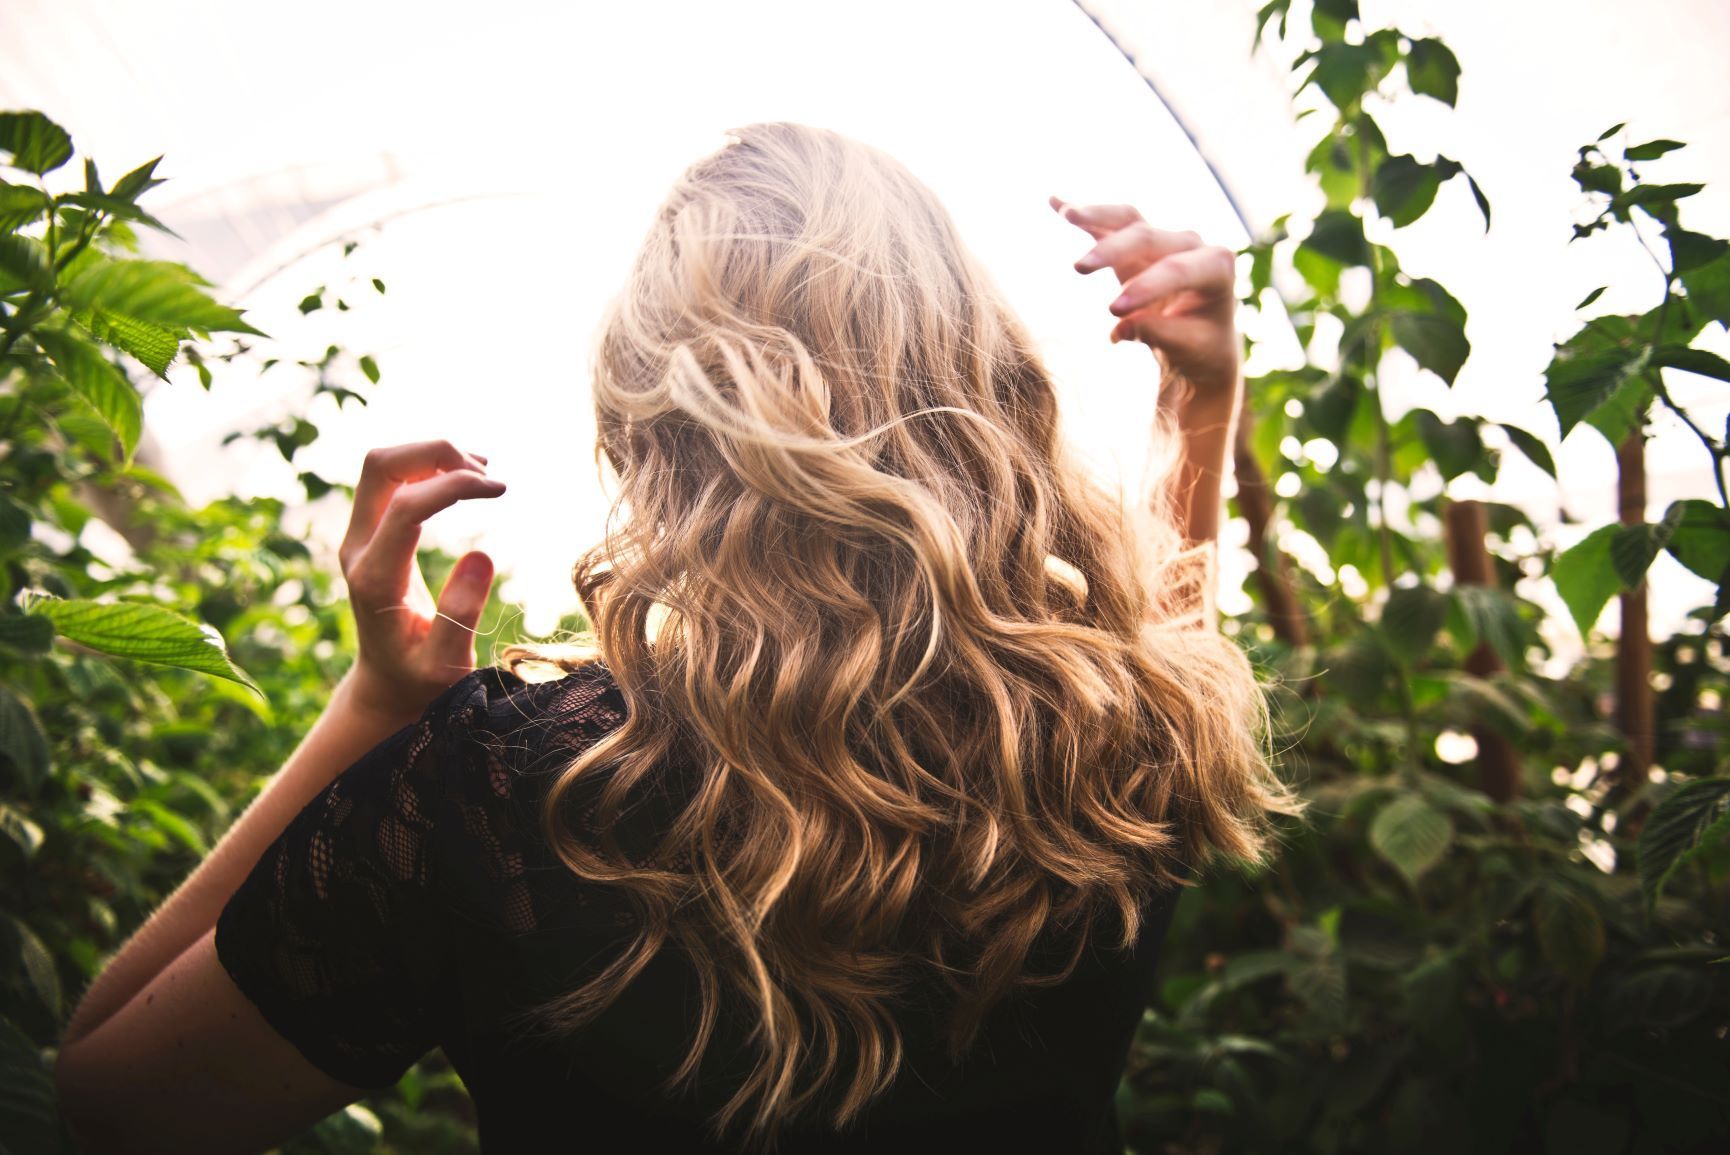 Organic Hair Care: Get Bouncy, Silky Hair The Natural Way | This Green